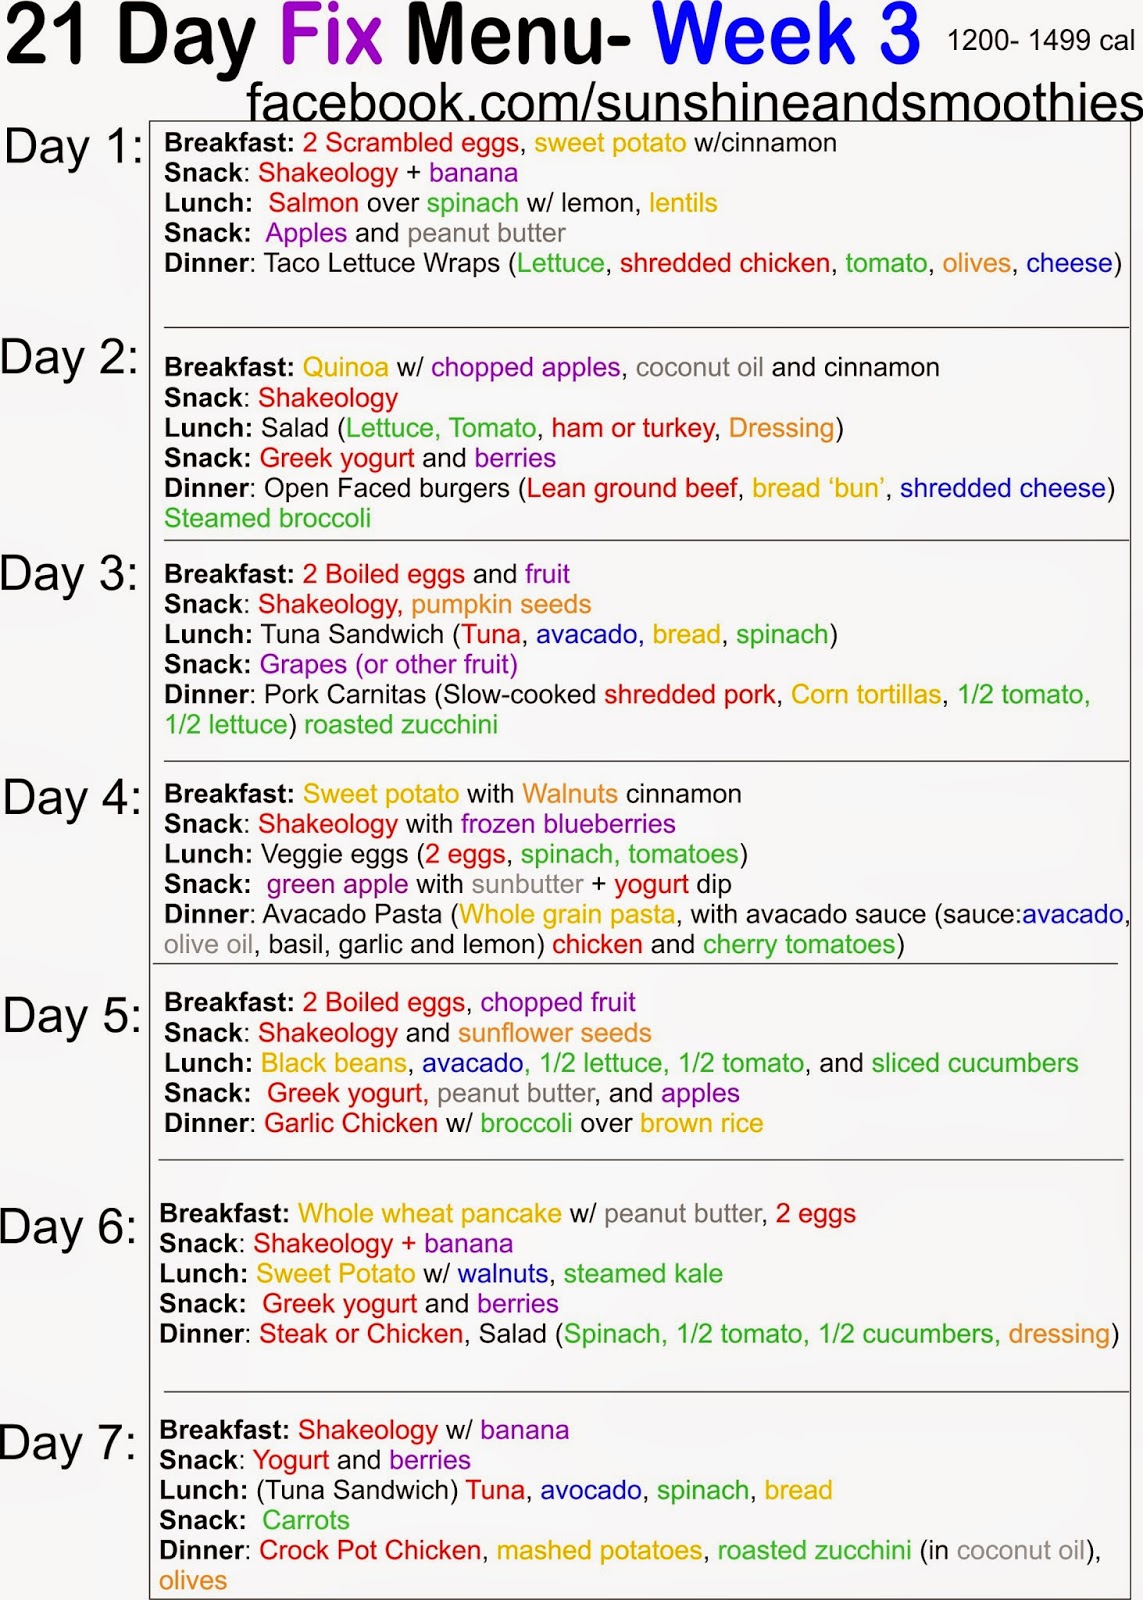 Sunshine and Smoothies Fitness: 21 Day Fix Menu - Week 3